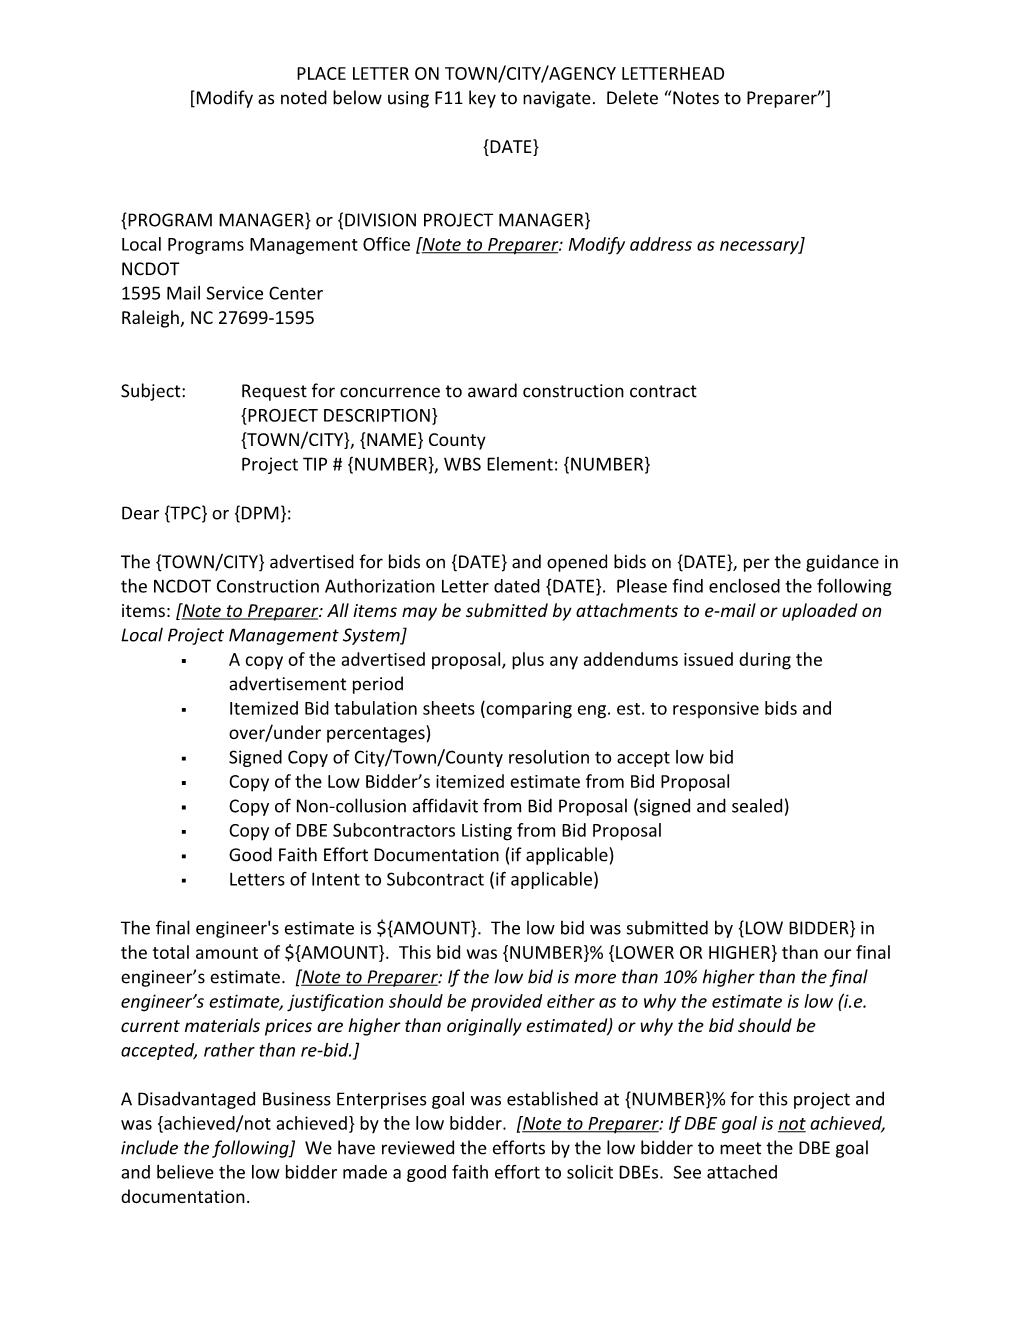 Letter from LGA Requesting NCDOT Concurrence with Construction Contractor